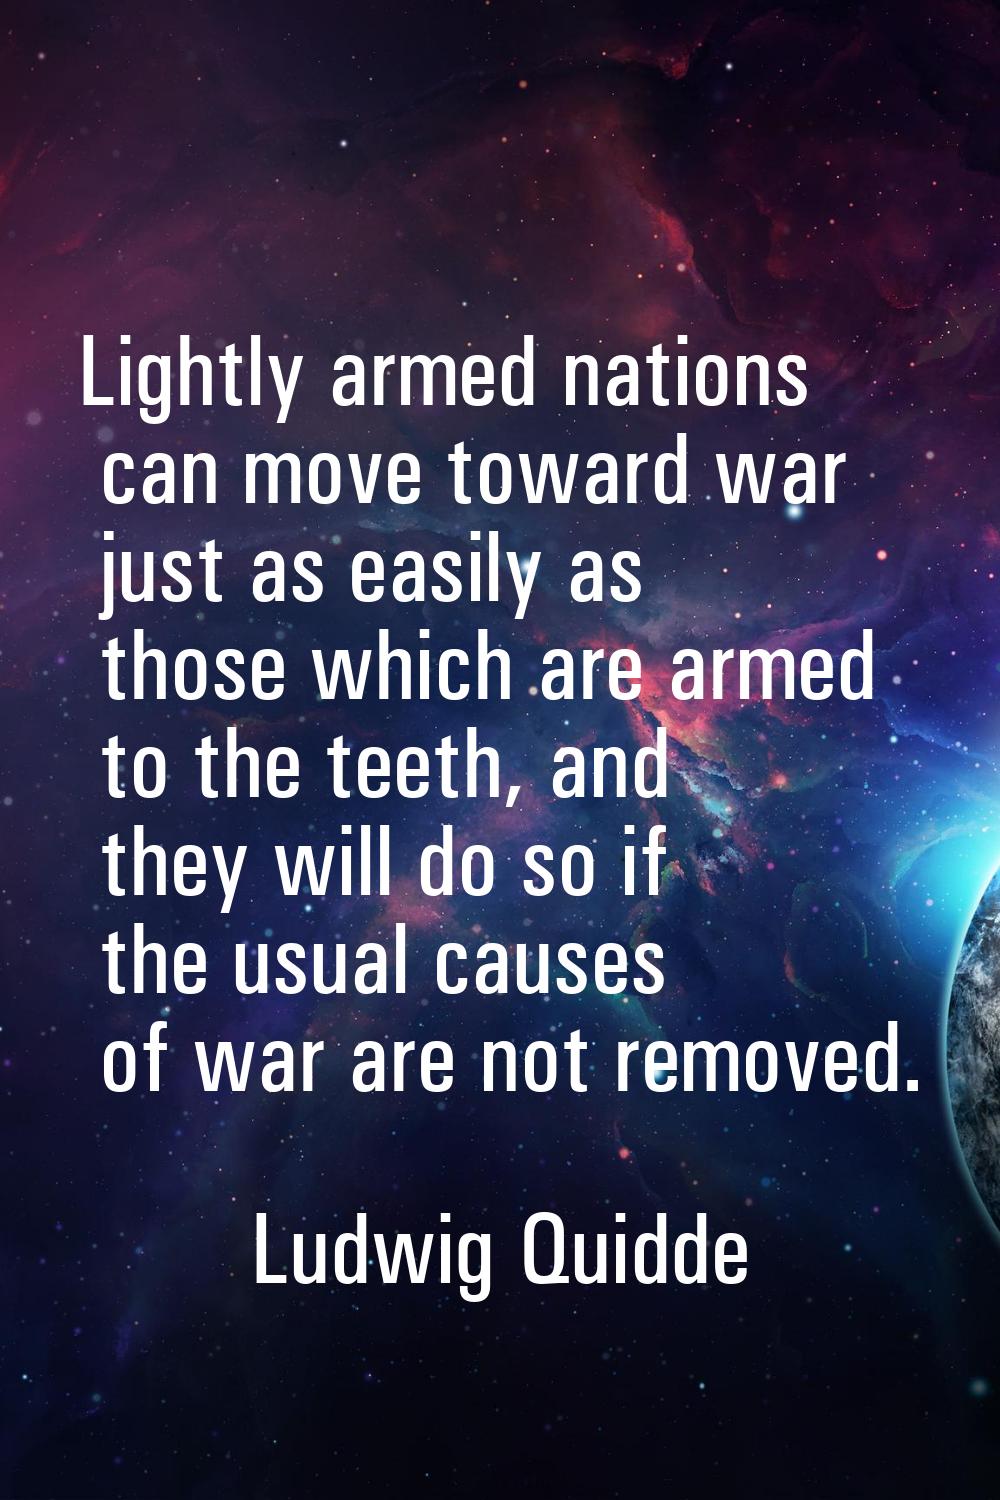 Lightly armed nations can move toward war just as easily as those which are armed to the teeth, and